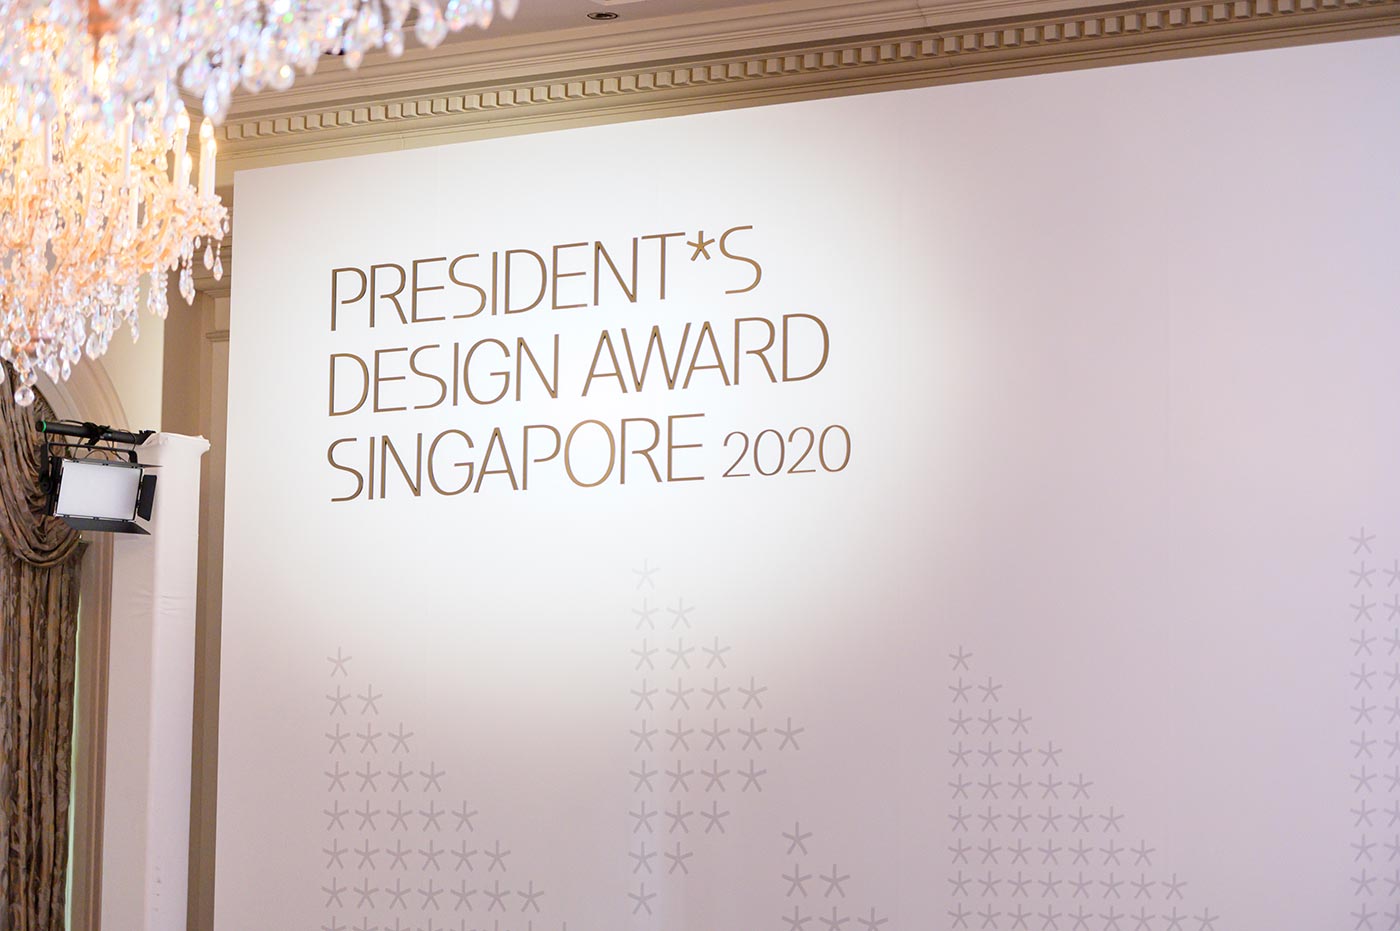 President*s Design Award celebrates top local designers and designs for their outstanding contributions to Singapore and the world